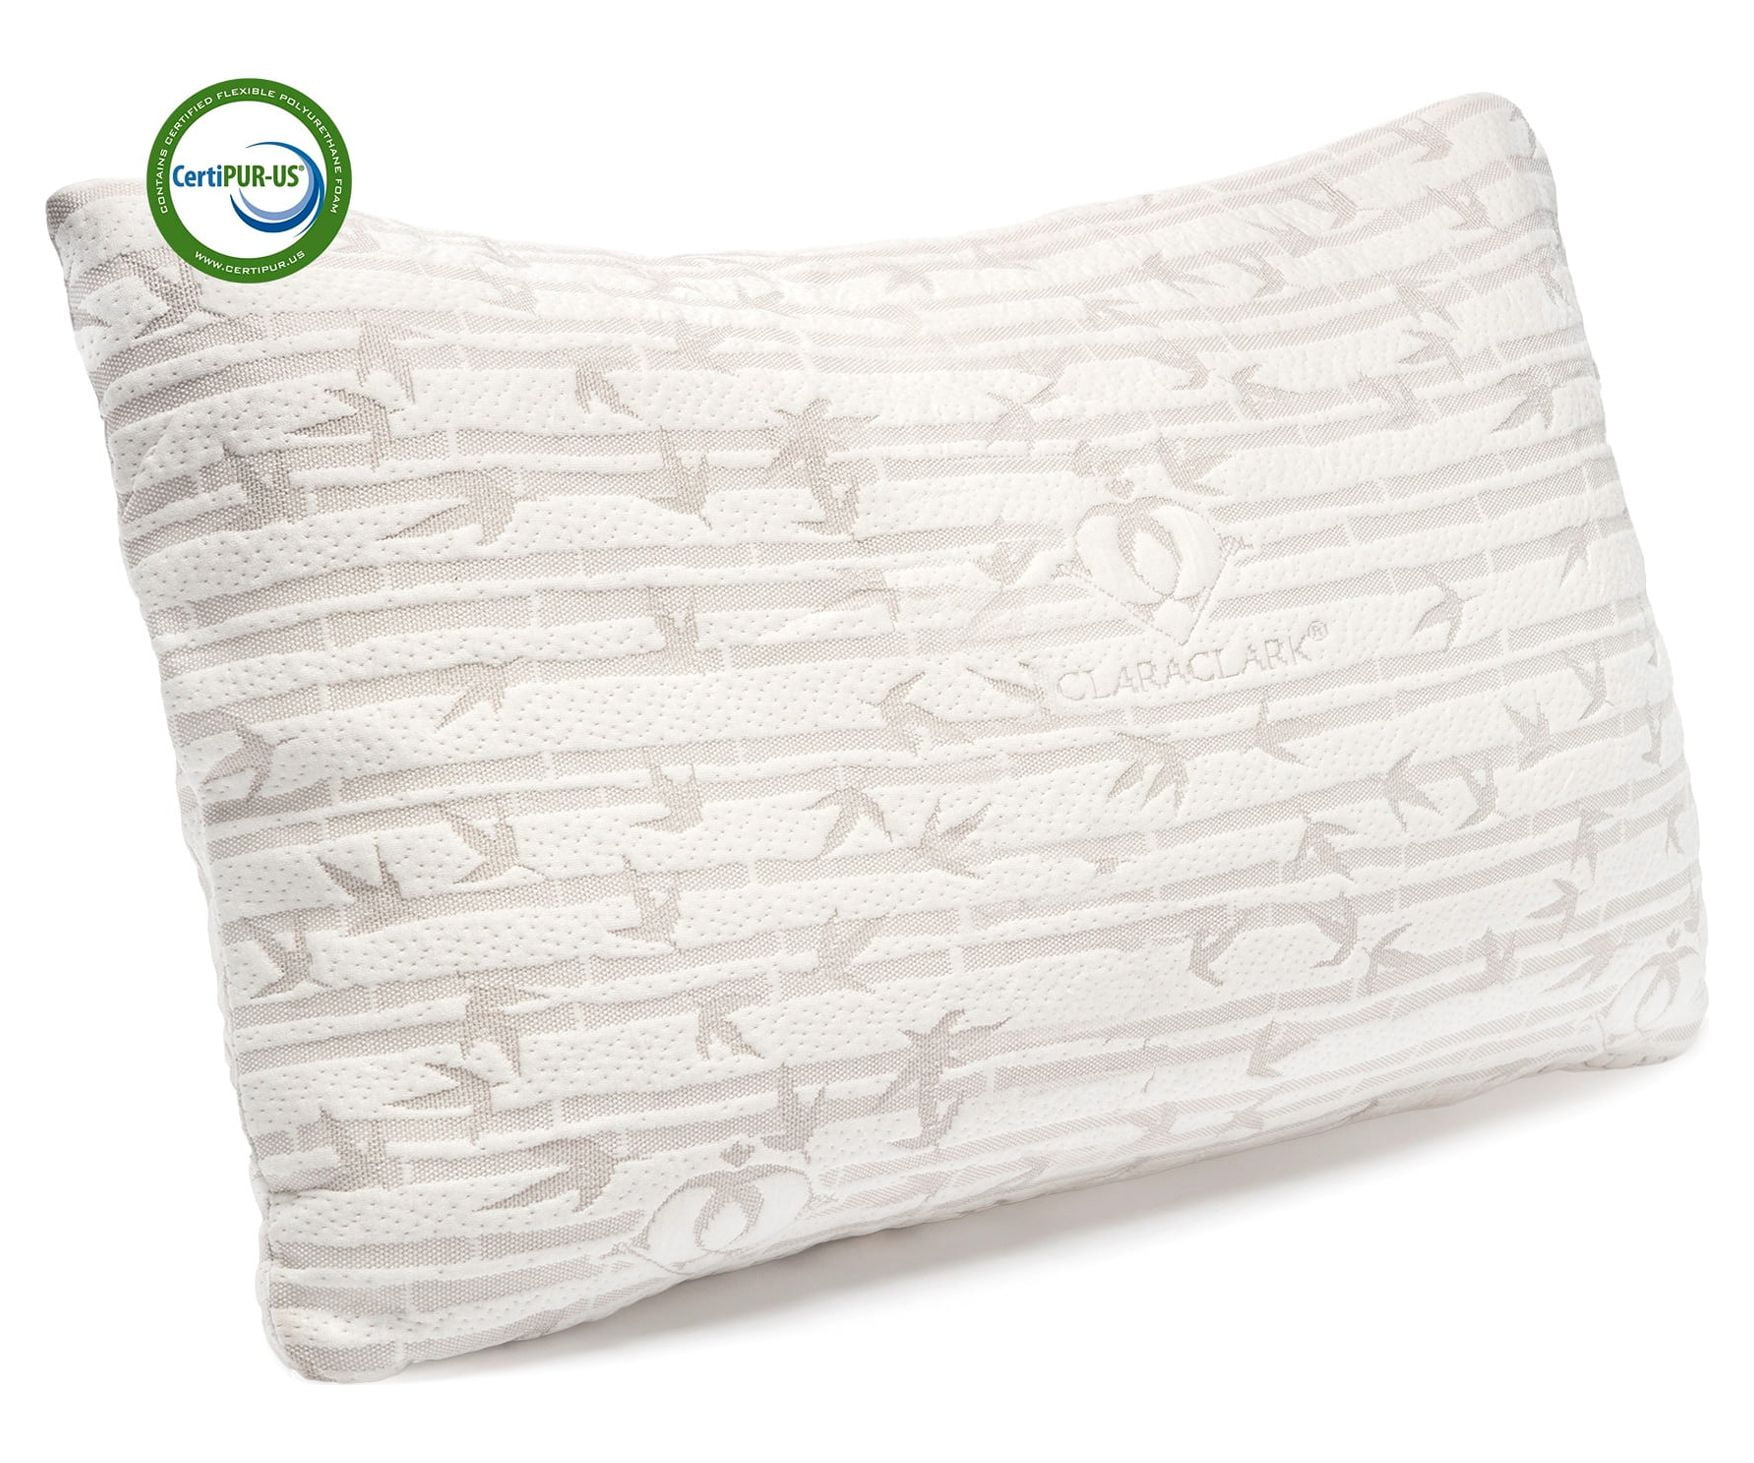 Cosy House Collection Luxury Bamboo Viscose Shredded Memory Foam Pillow -  Adjustable & Removable Fill - Soft, Cool & Breathable Cover with Zipper  Closure for Side, Back, & Stomach Sleepers (Queen)